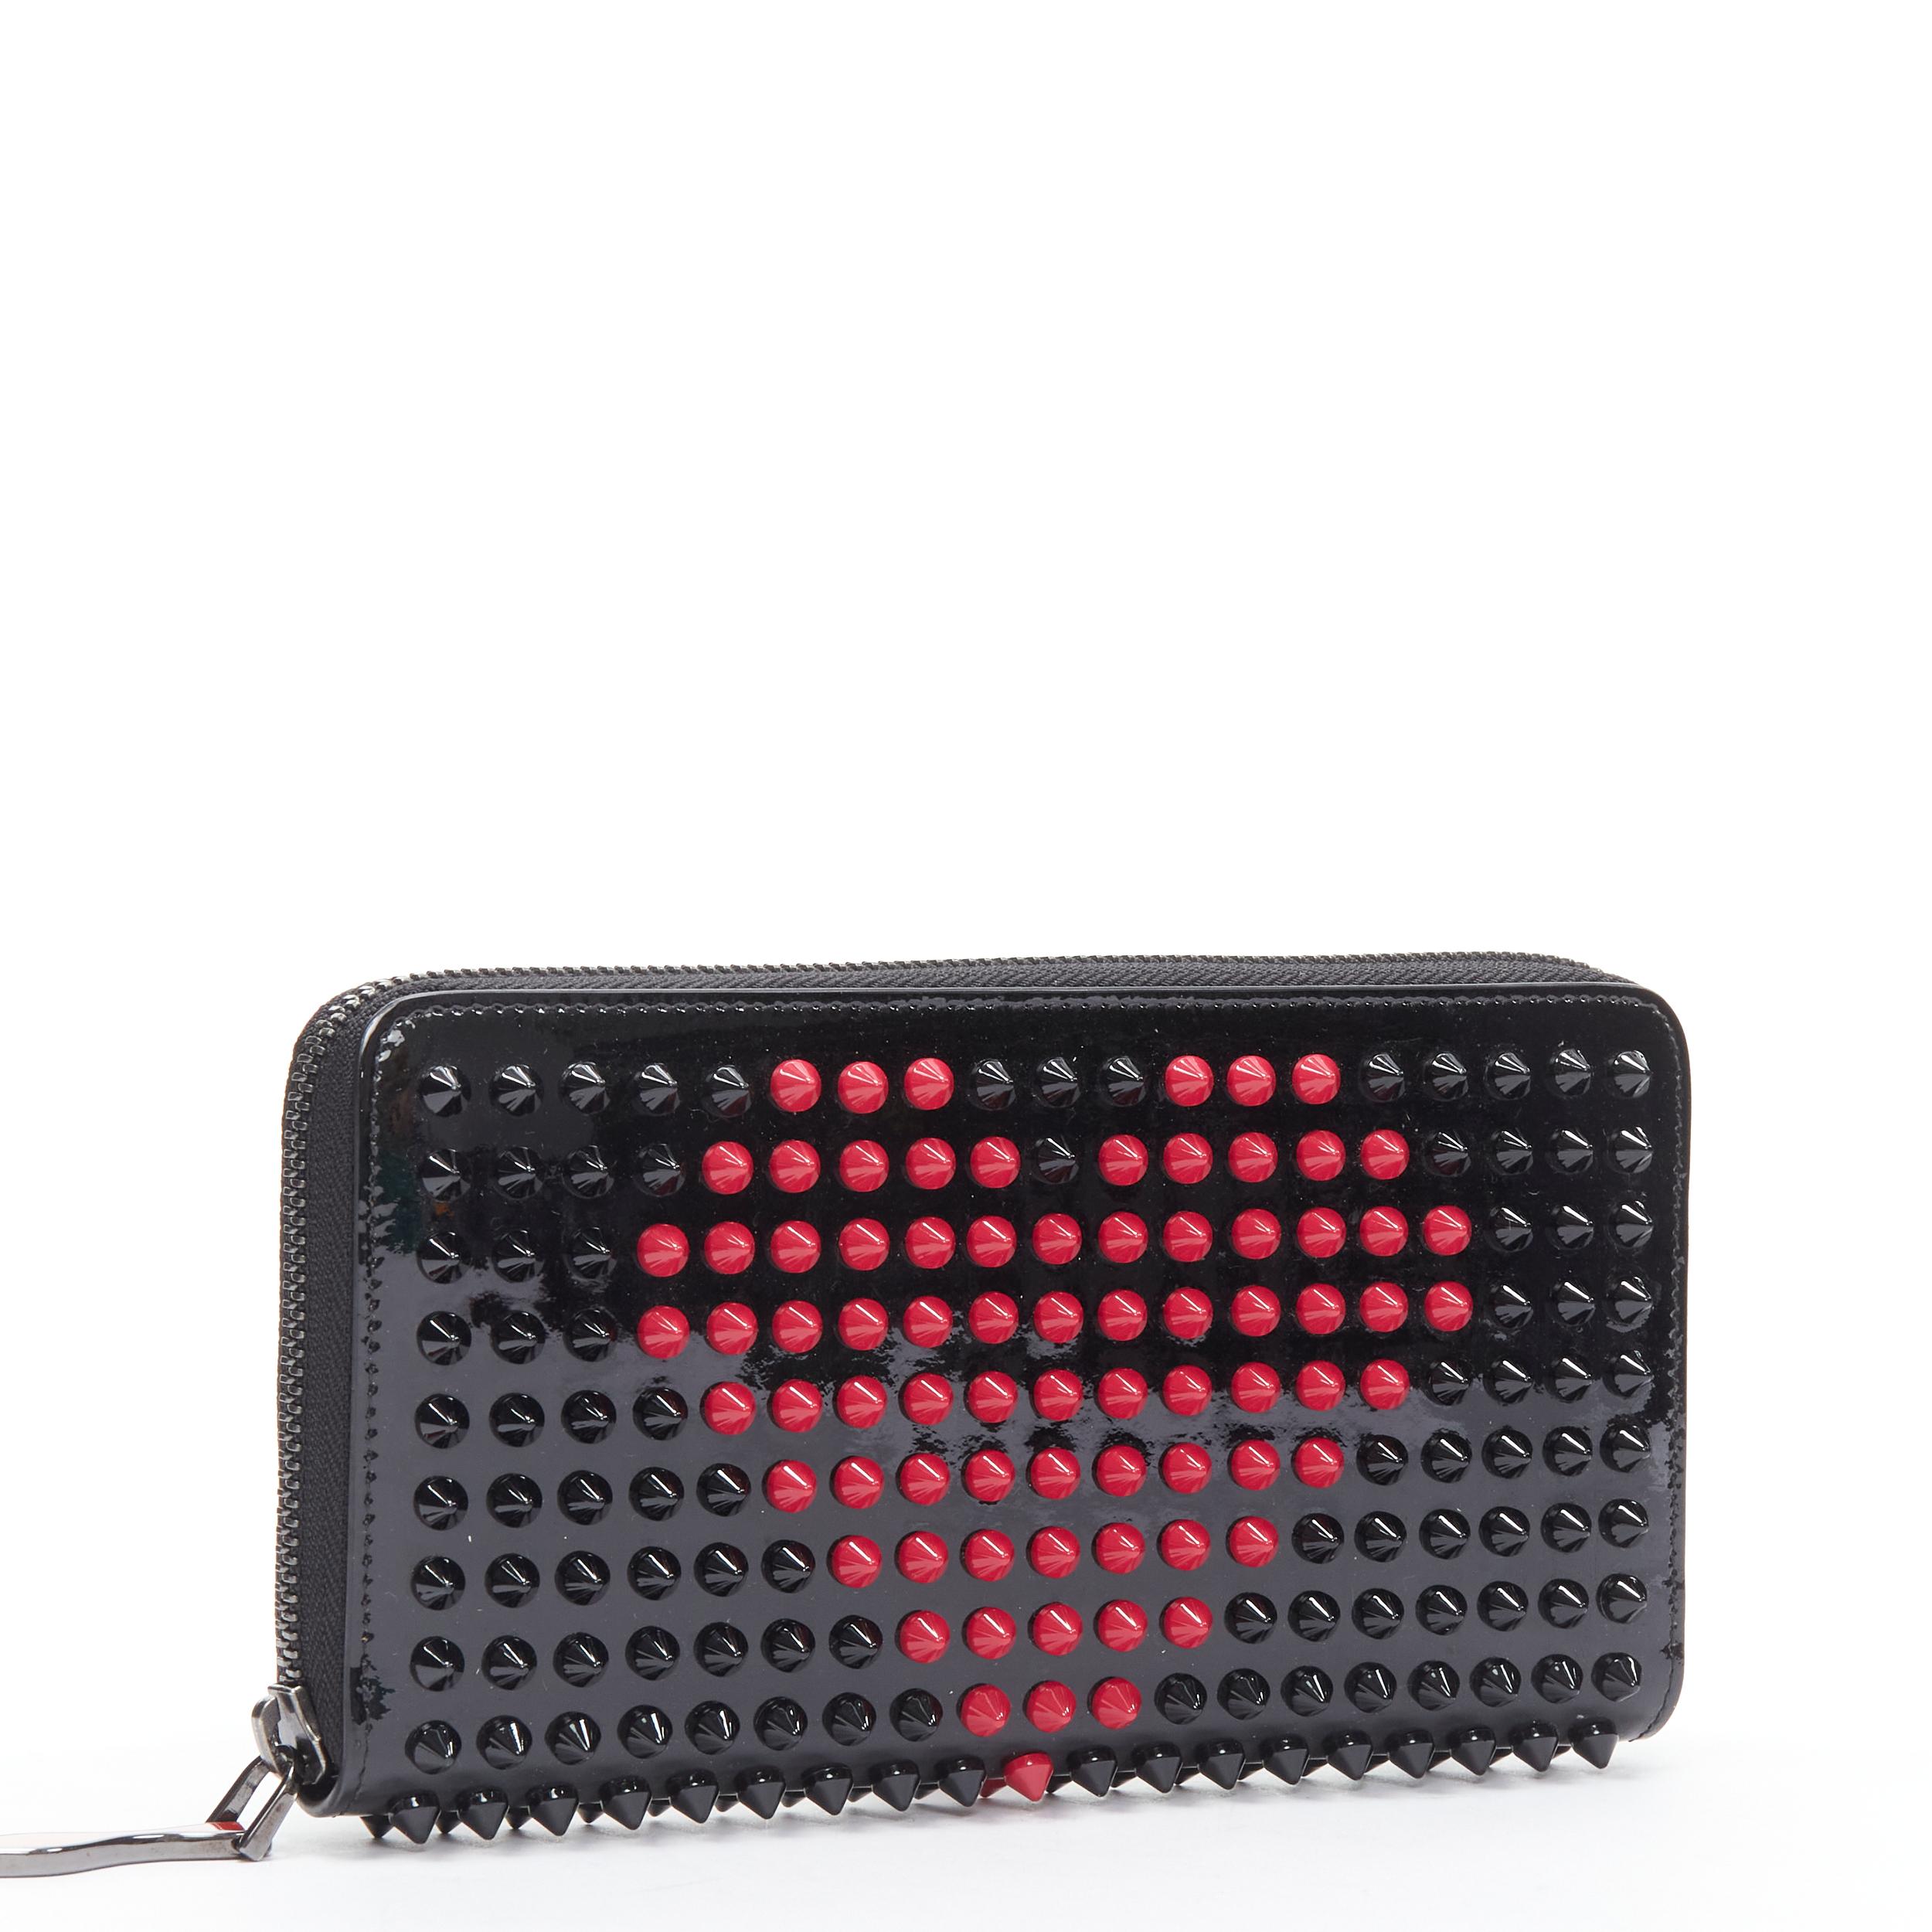 new CHRISTIAN LOUBOUTIN Panettone Valentines black patent pink heart spike stud continental wallet Reference: TGAS/B02175 
Brand: Christian Louboutin 
Material: Patent Leather 
Color: Black 
Pattern: Solid 
Closure: Zip 
Made in: Italy 

CONDITION: